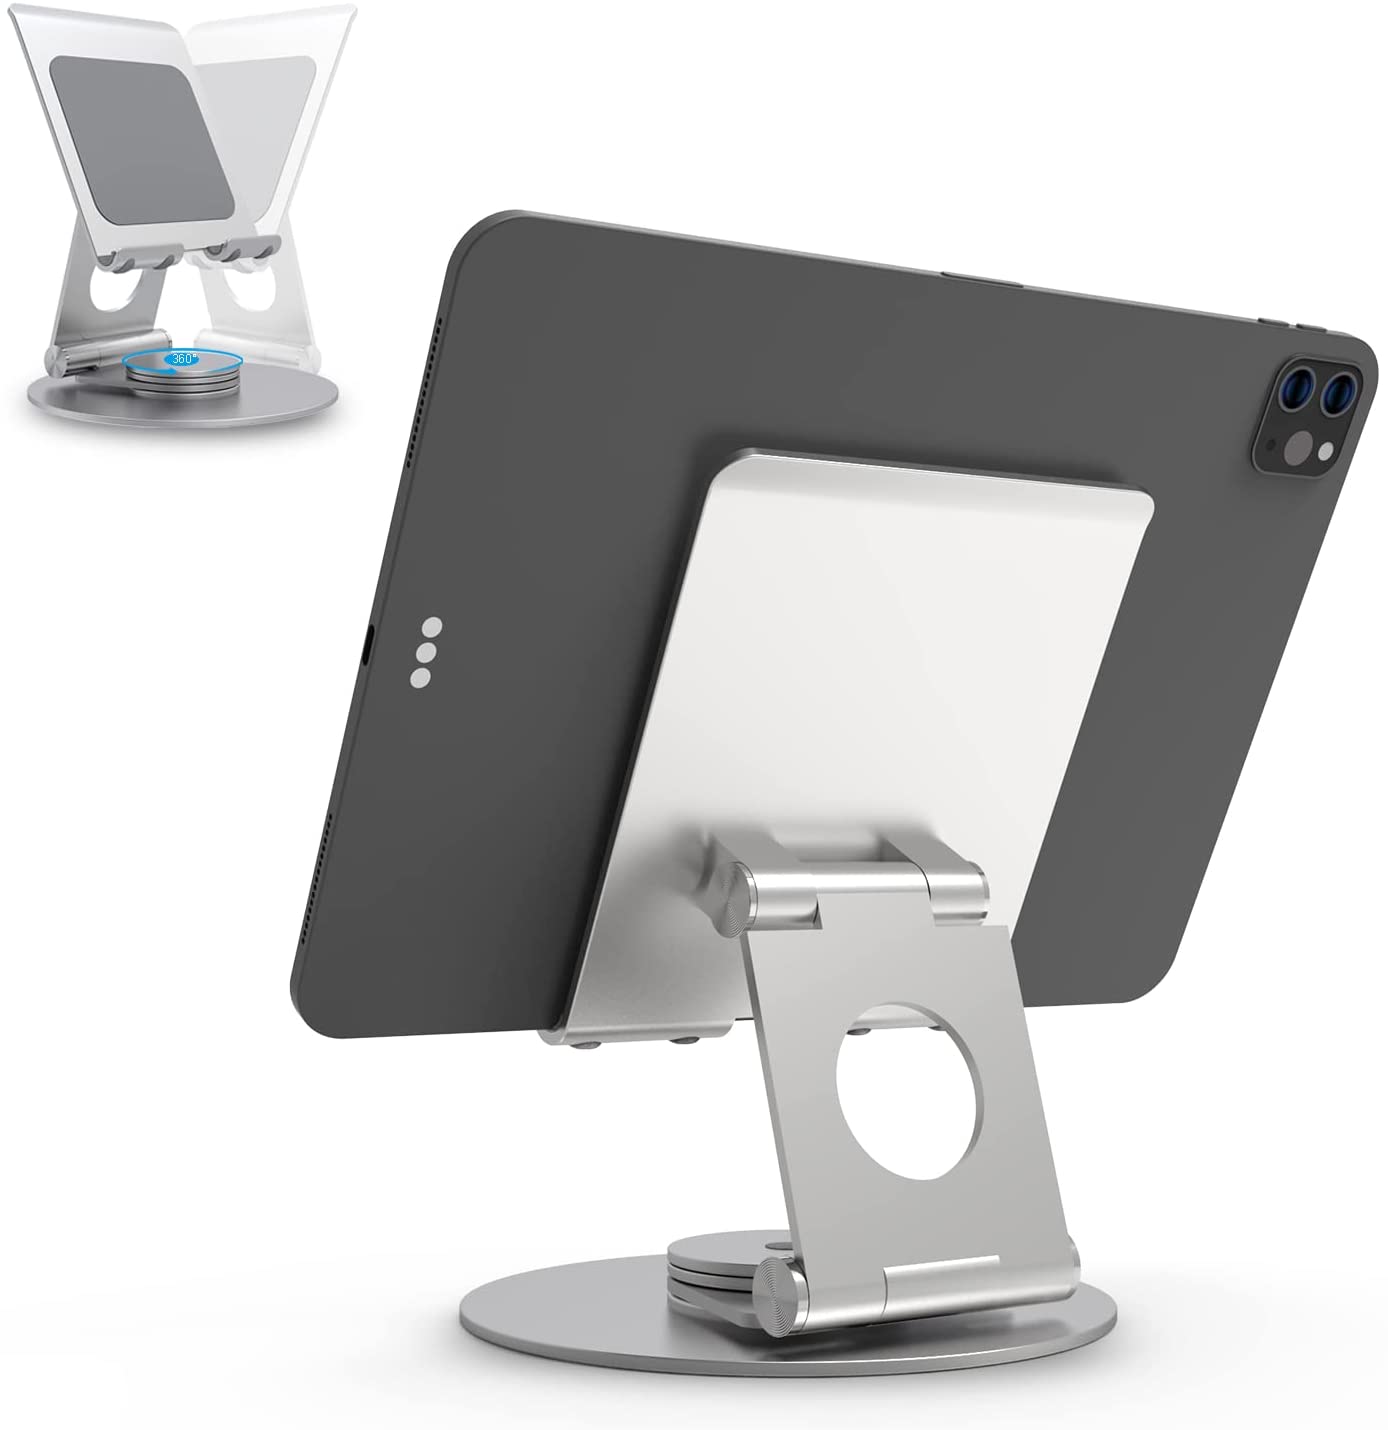 [US Stock] Swivel Tablet Stand,KABCON Aluminum Portable 360°Rotating Tablet iPad Stand Holder